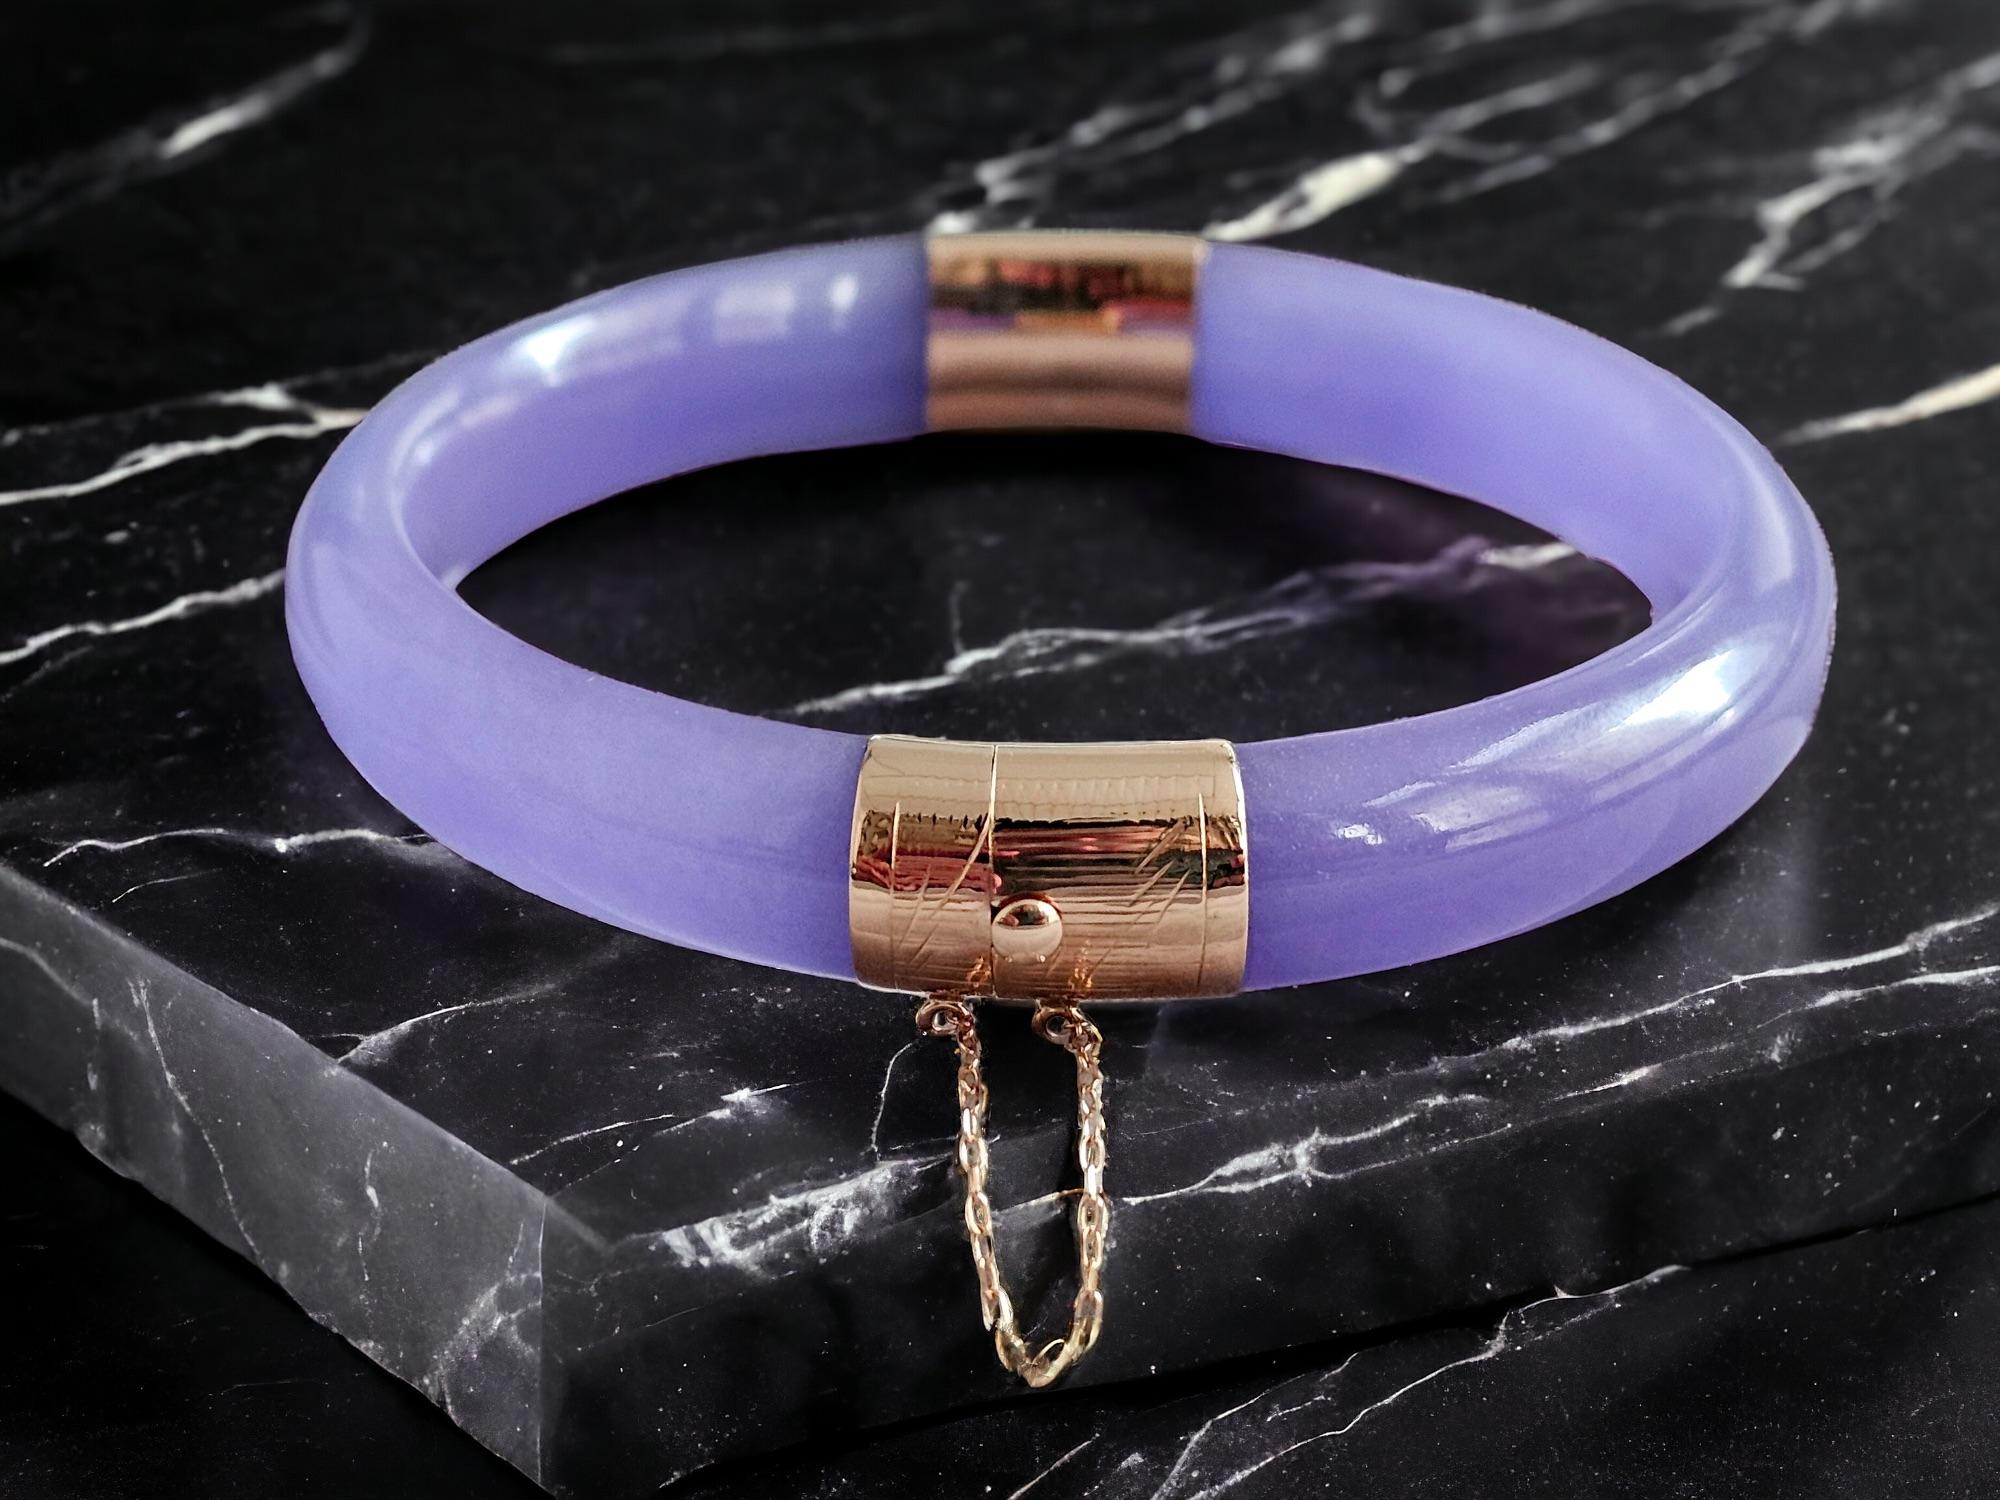 Mixed Cut Viceroy's Circular Lavender Jade Bangle Bracelet (with 14K Yellow Gold) For Sale